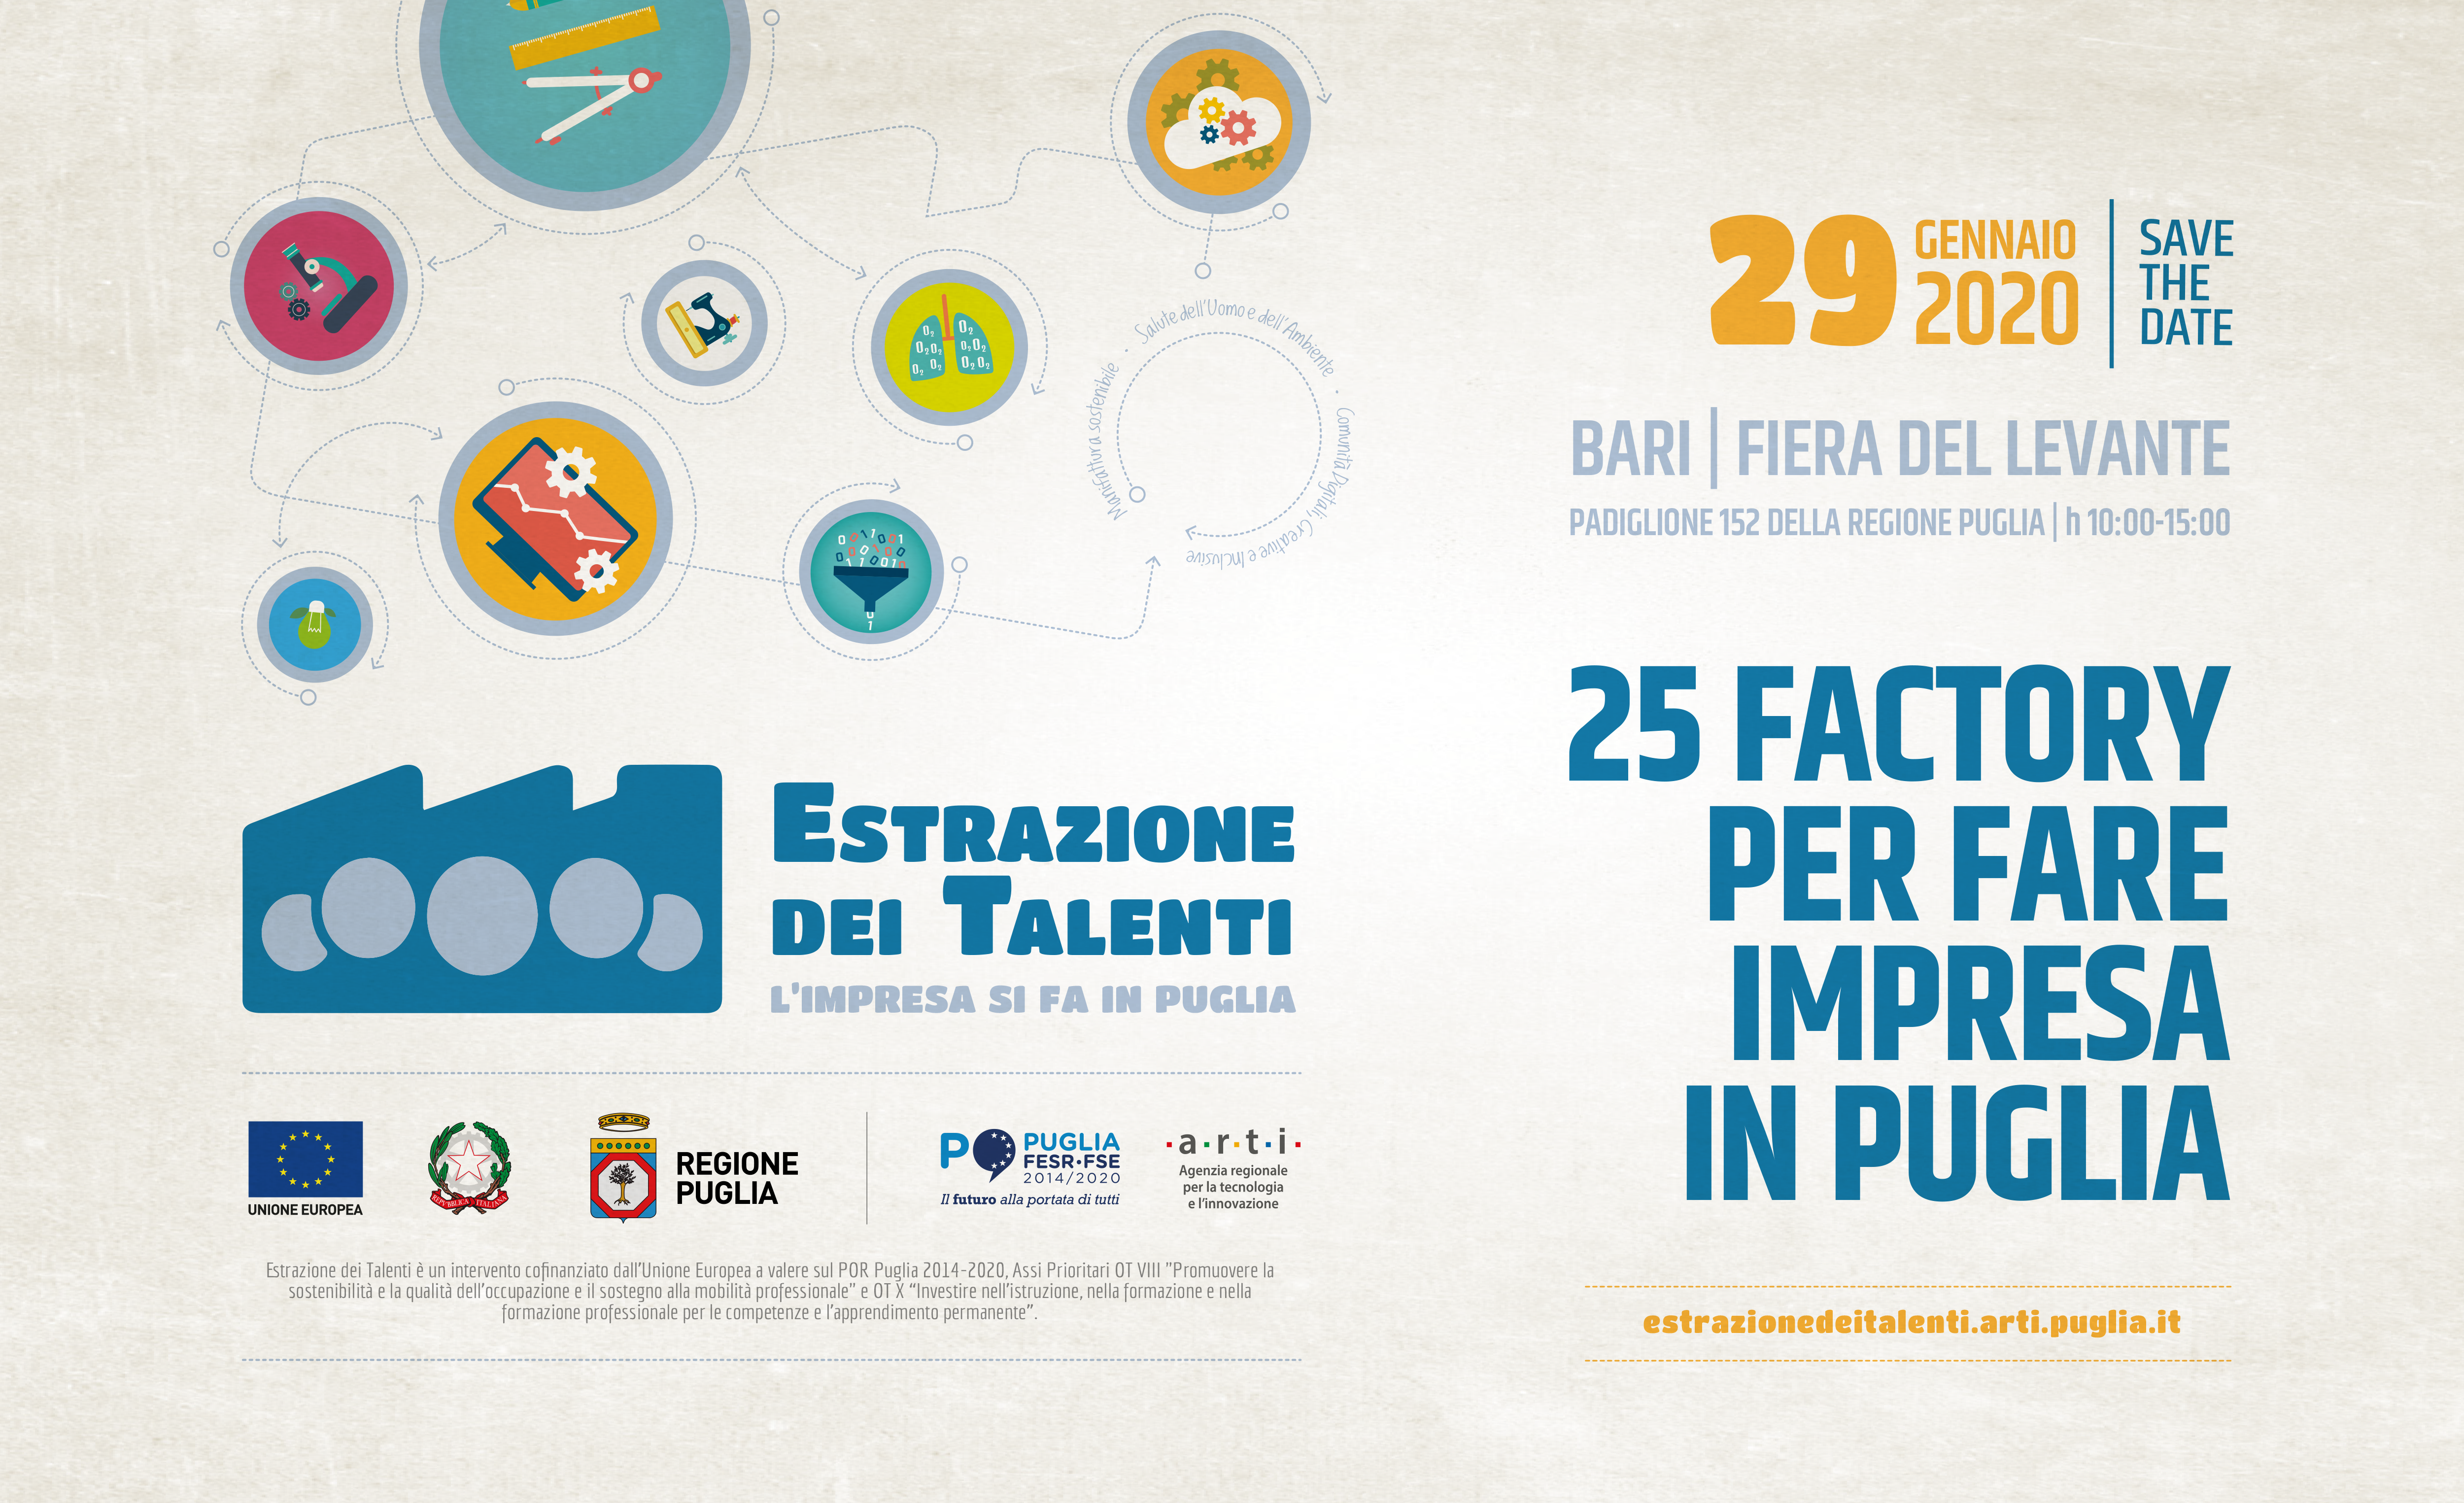 Save the date. Launch of the 25 Factories – Bari, Italy, January 29th, 2020